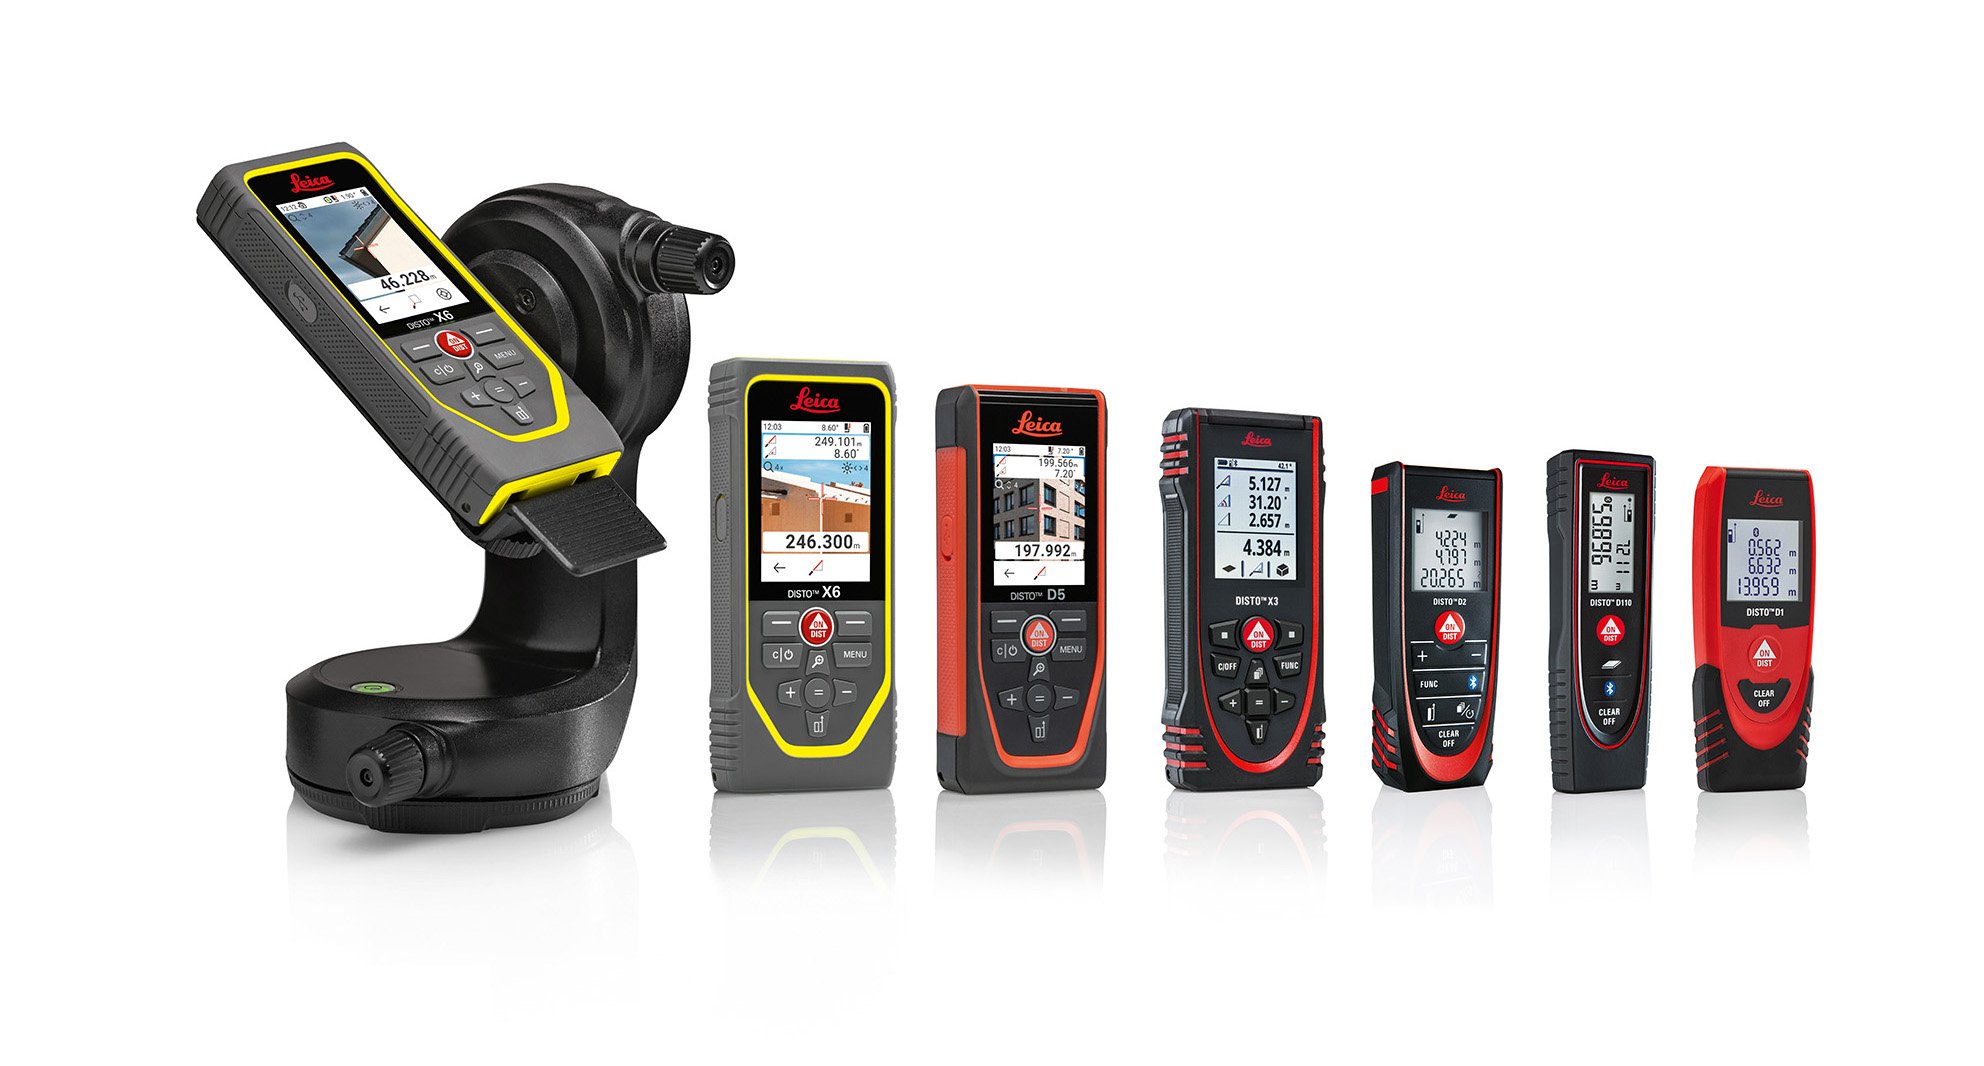 Leica DISTO series consisting of 6 laser measures with different functionality and size